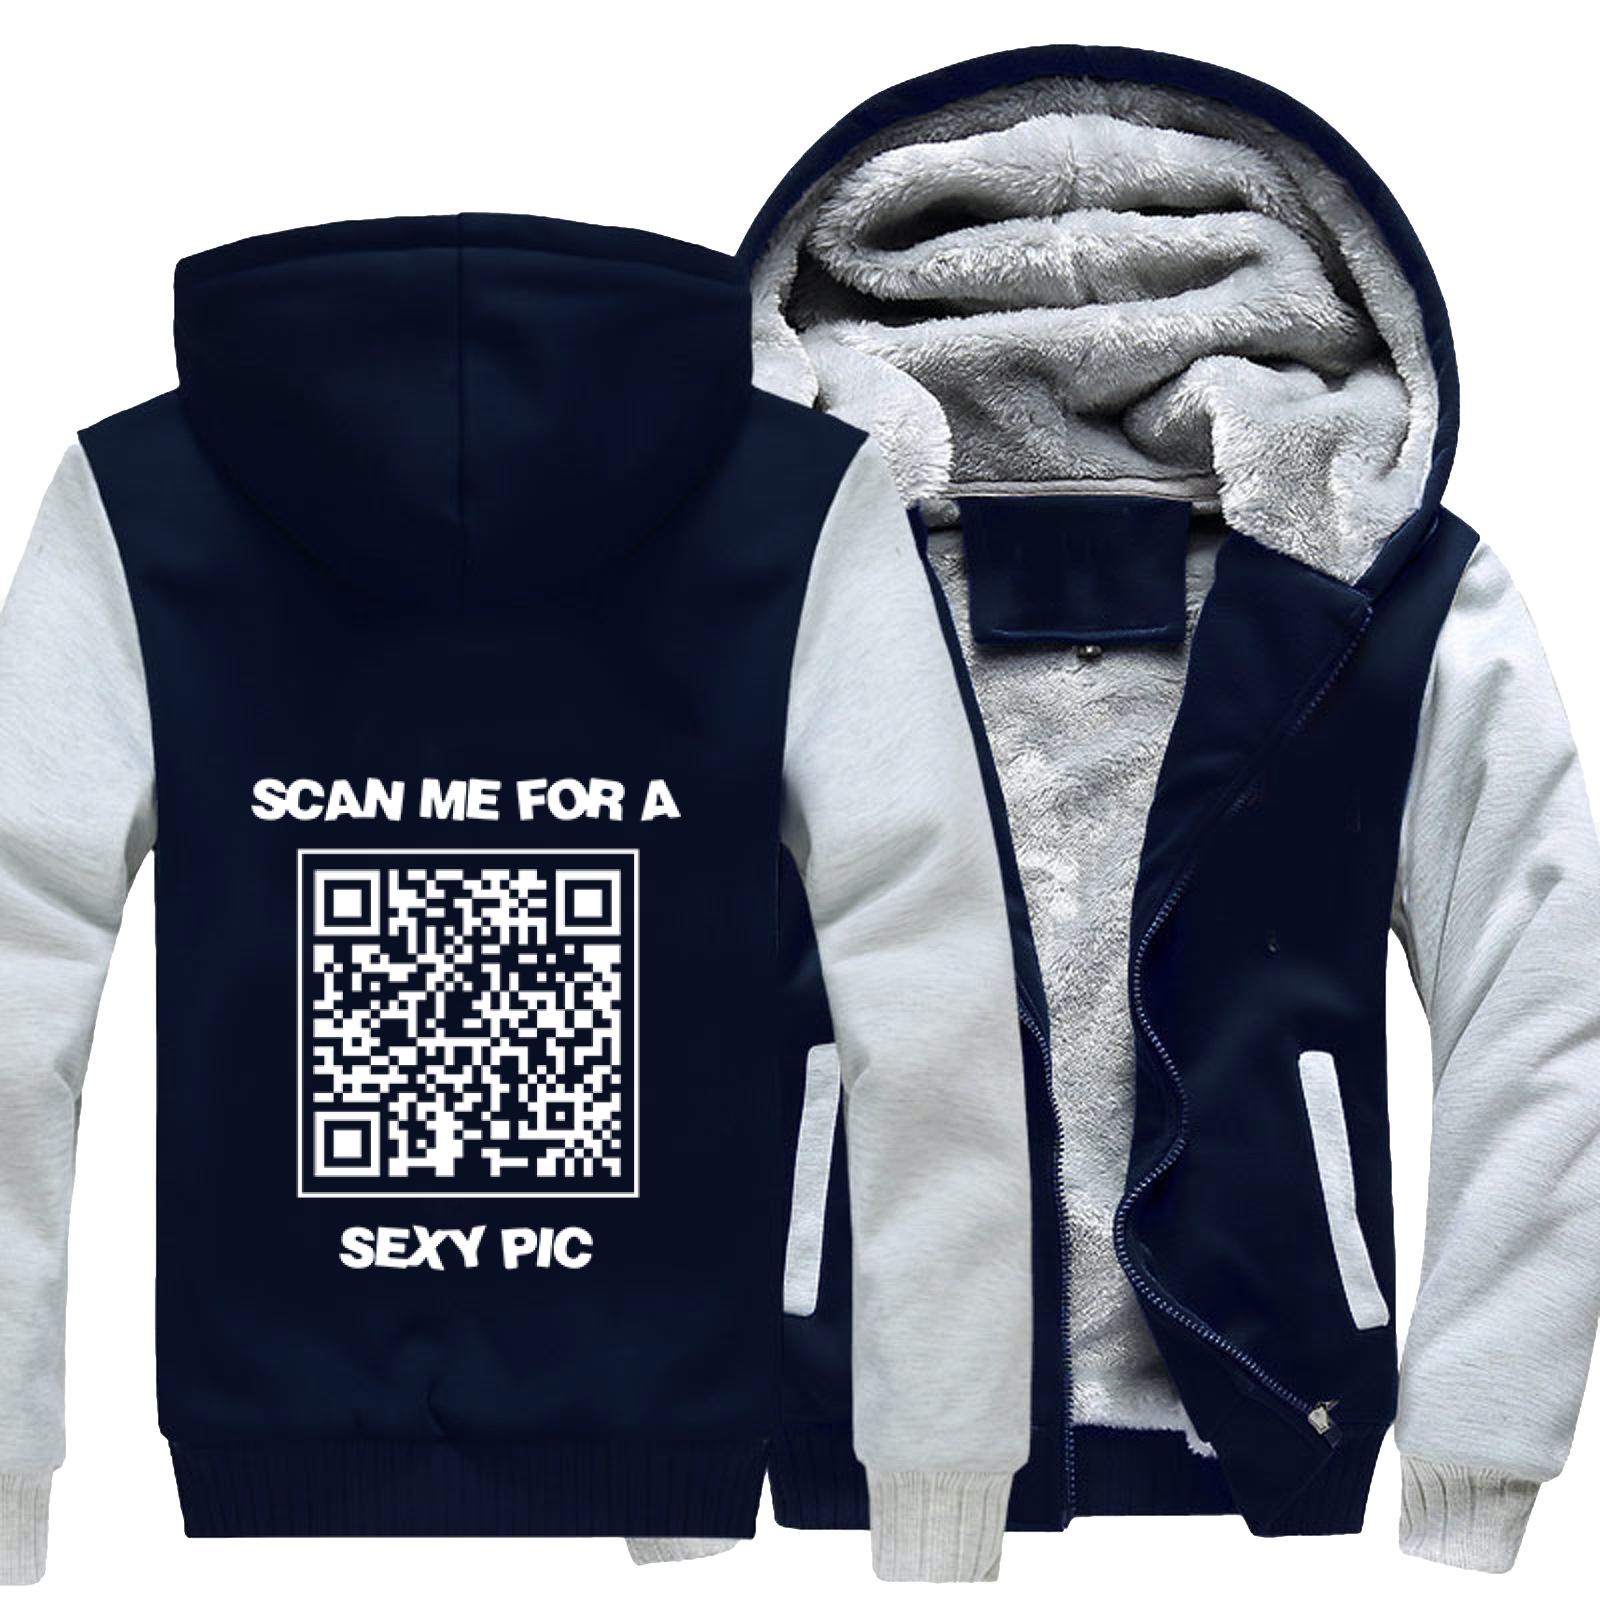 Scan Me For A Sexy Pic, April Fools' Day Fleece Jacket